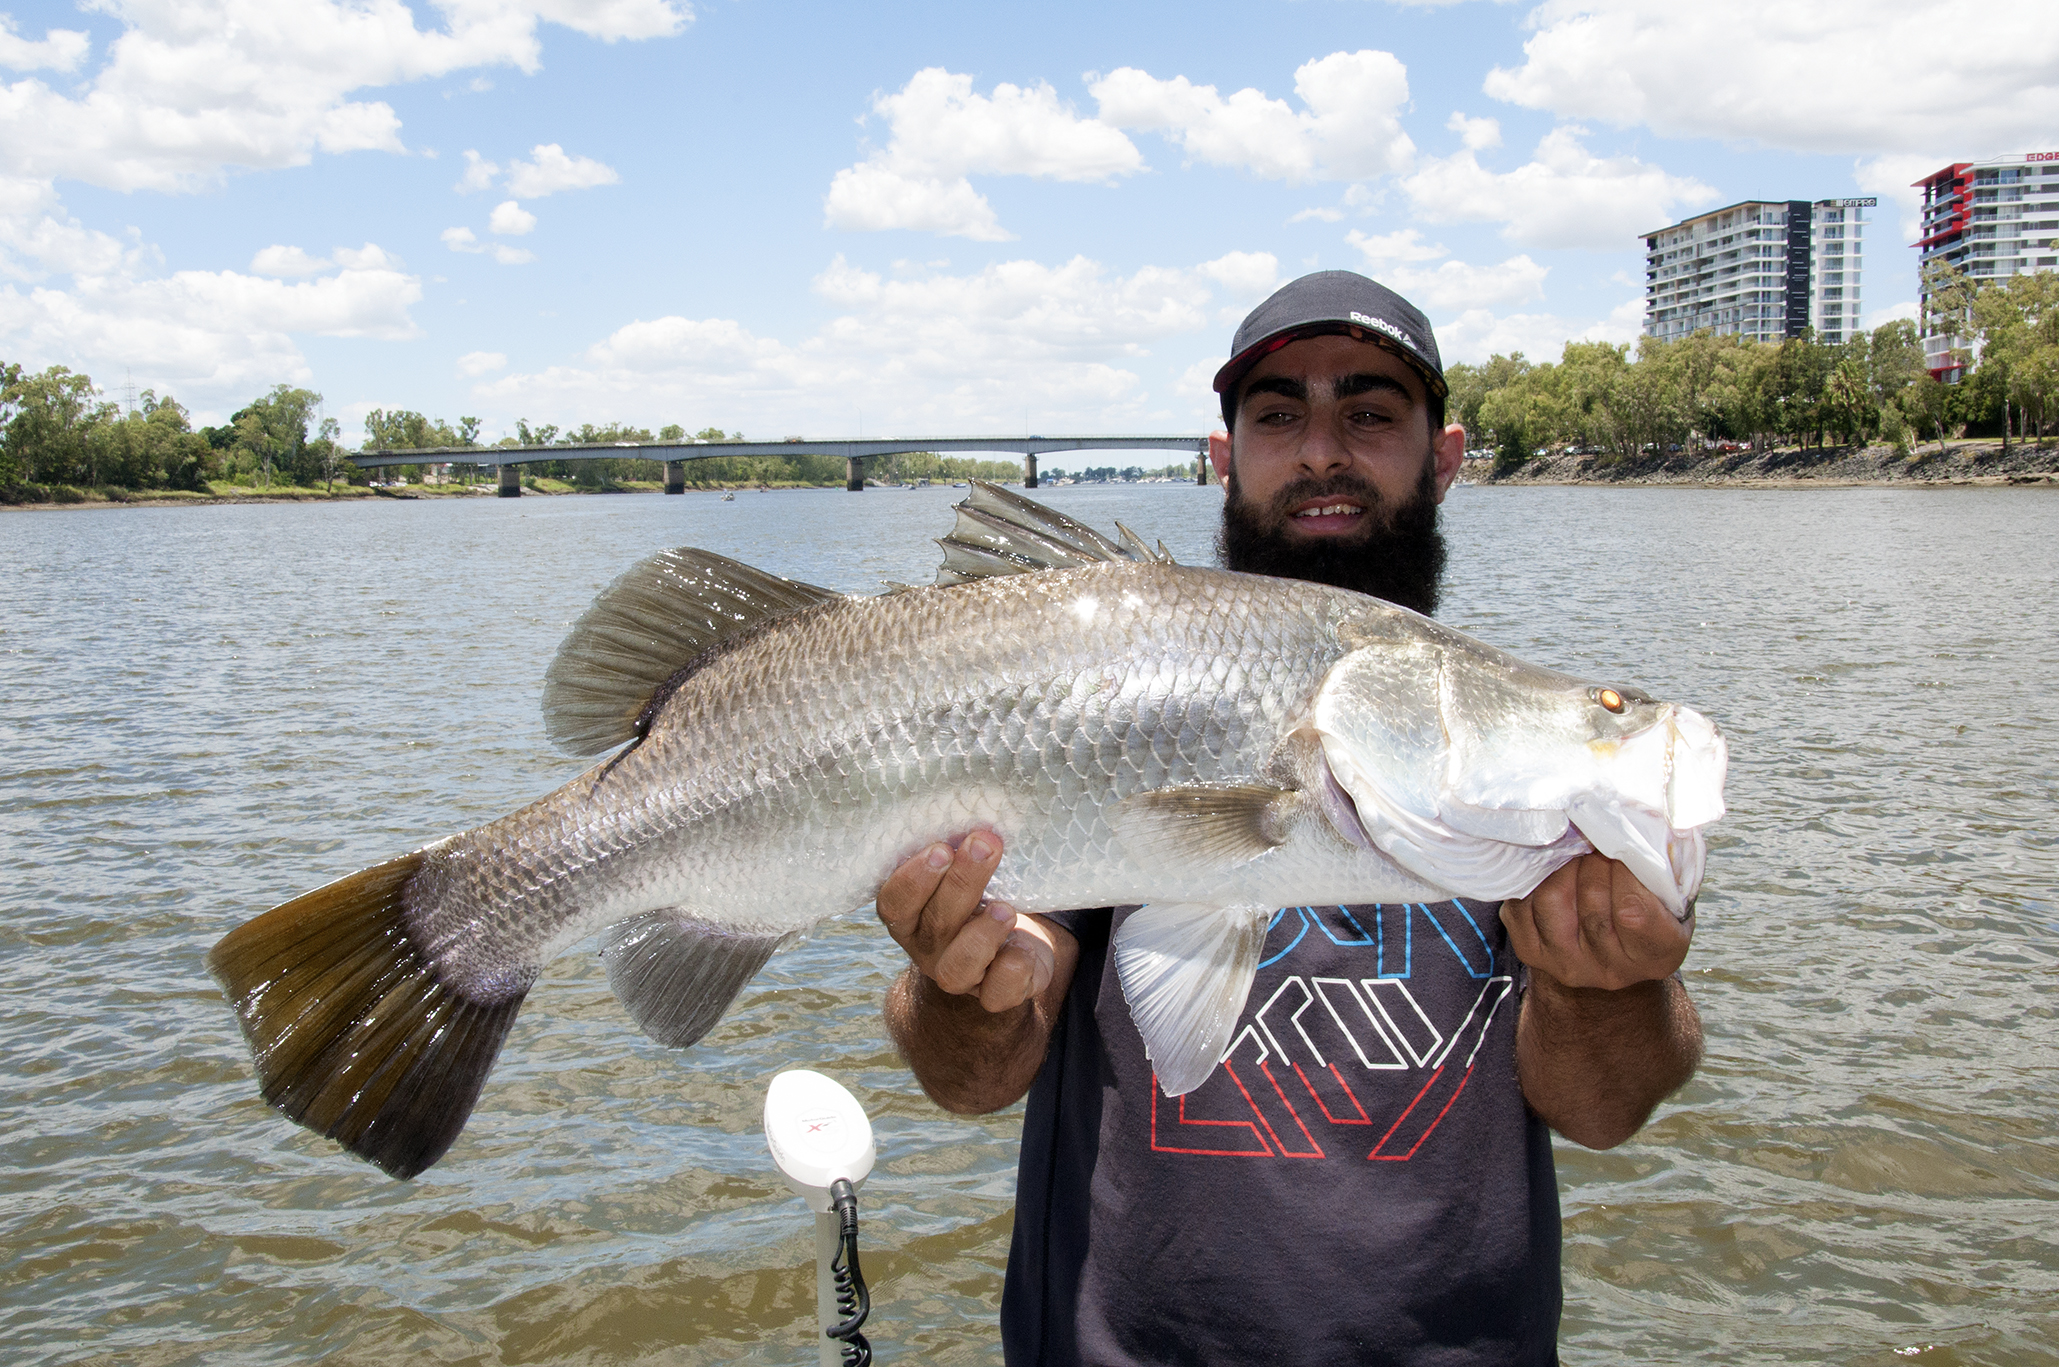 Some of the best barra fishing takes place literally in the middle of downtown Rockhampton!